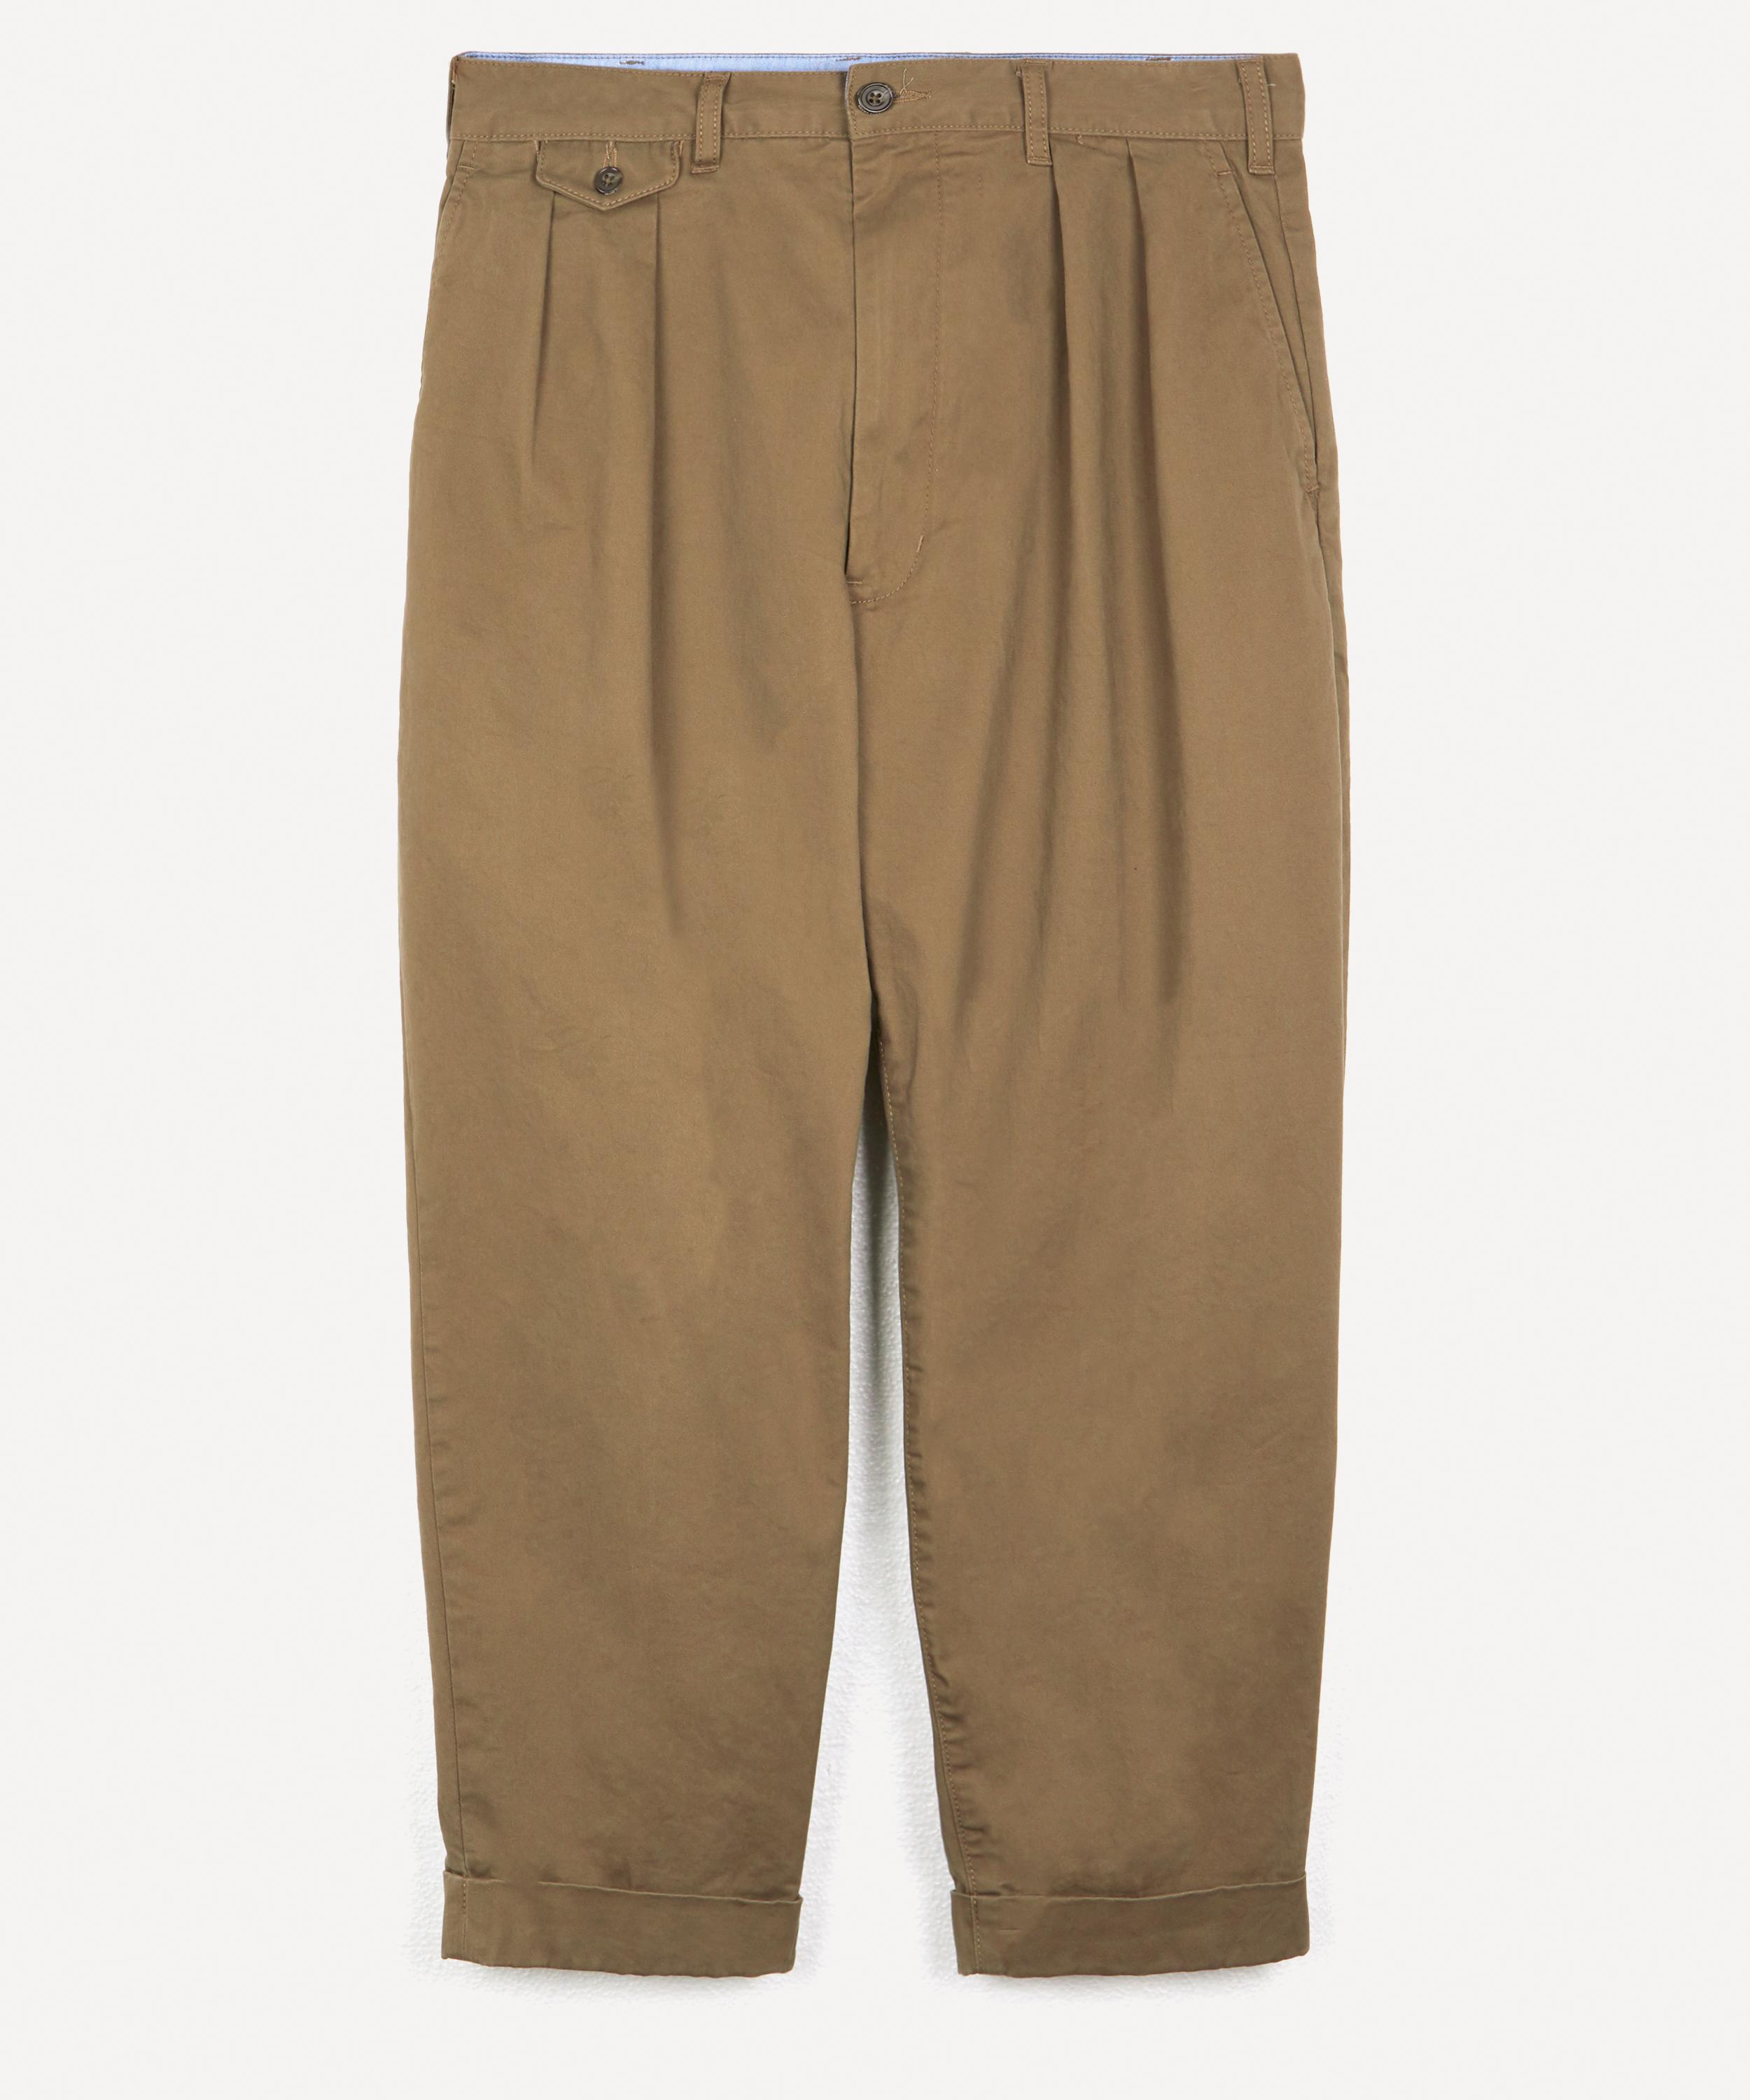 Beams Plus Exclusive 2 Pleat Chino Trousers in Olive (Green) for Men - Lyst